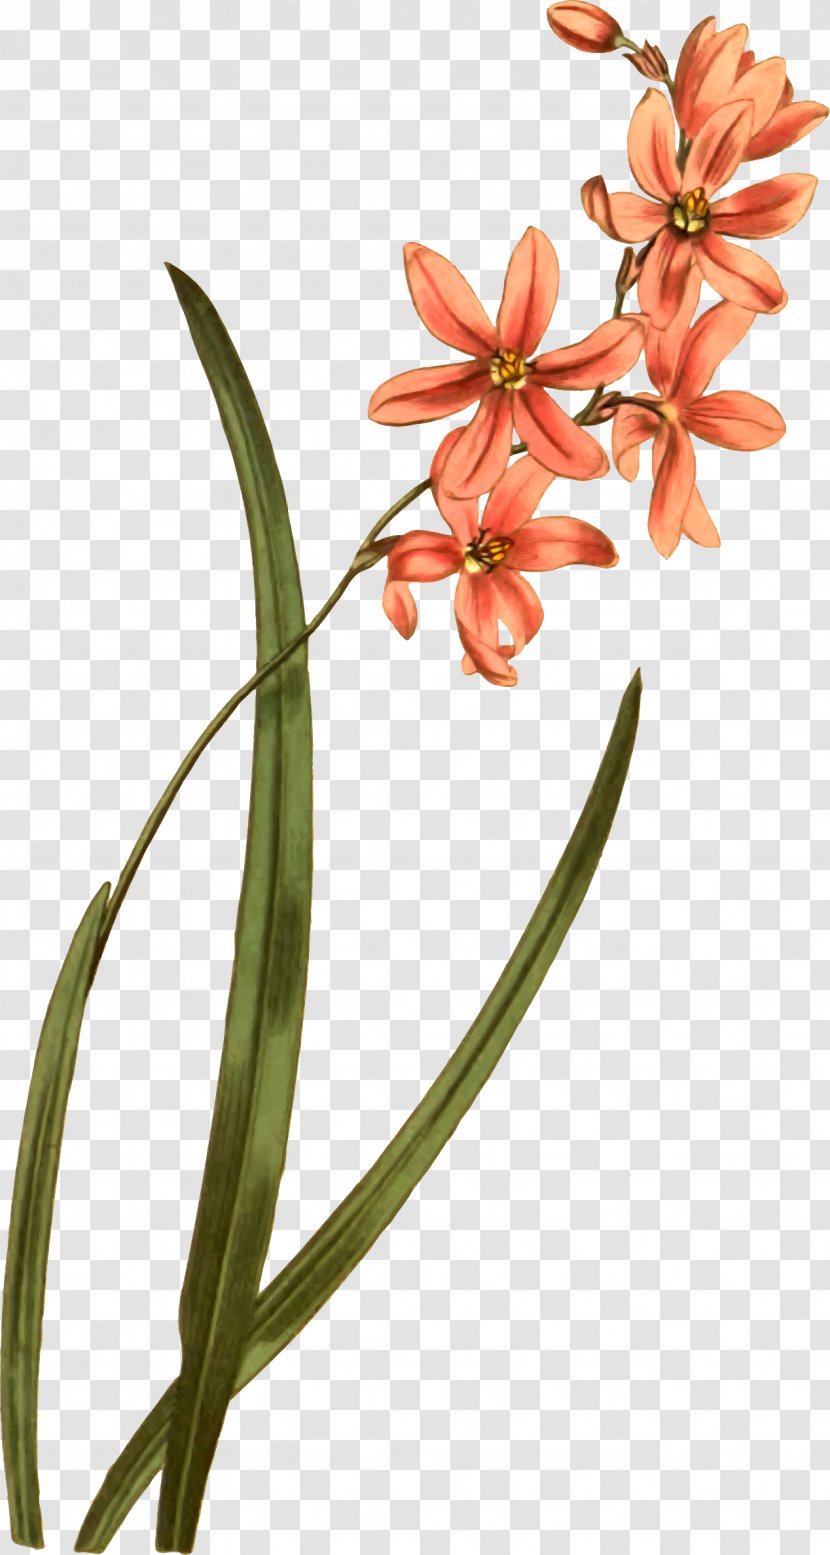 Flower Plant Clip Art - Lily Of The Valley Transparent PNG